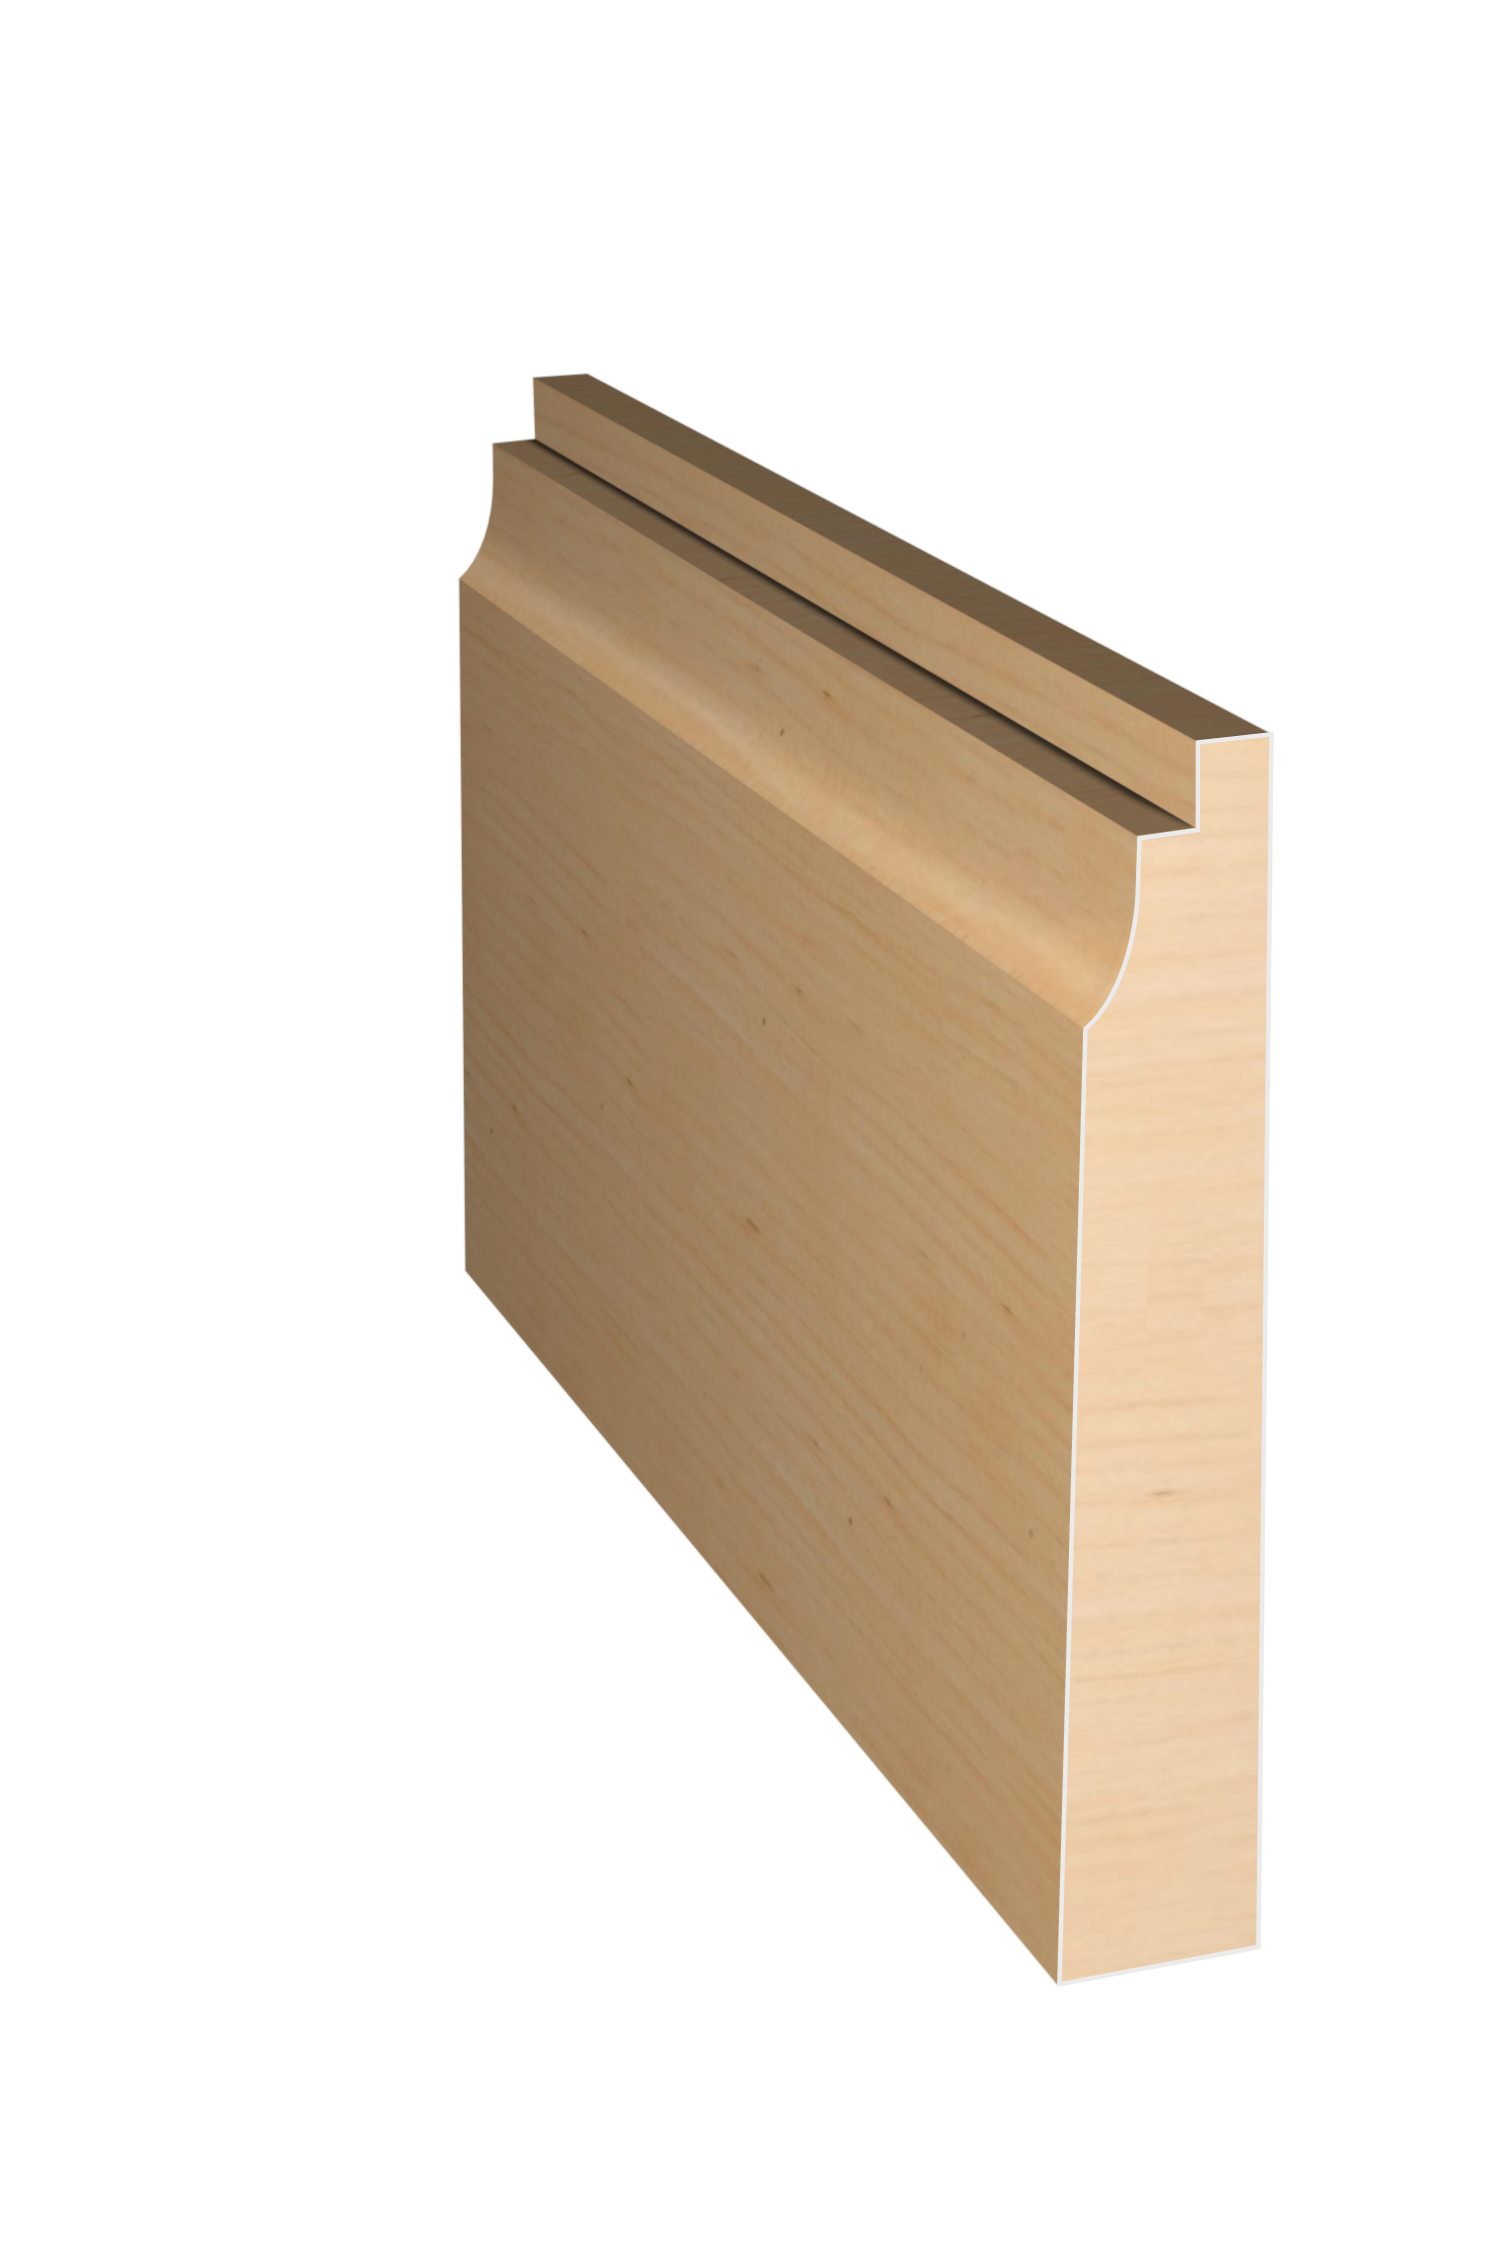 Three dimensional rendering of custom casing wood molding CAPL3382 made by Public Lumber Company in Detroit.